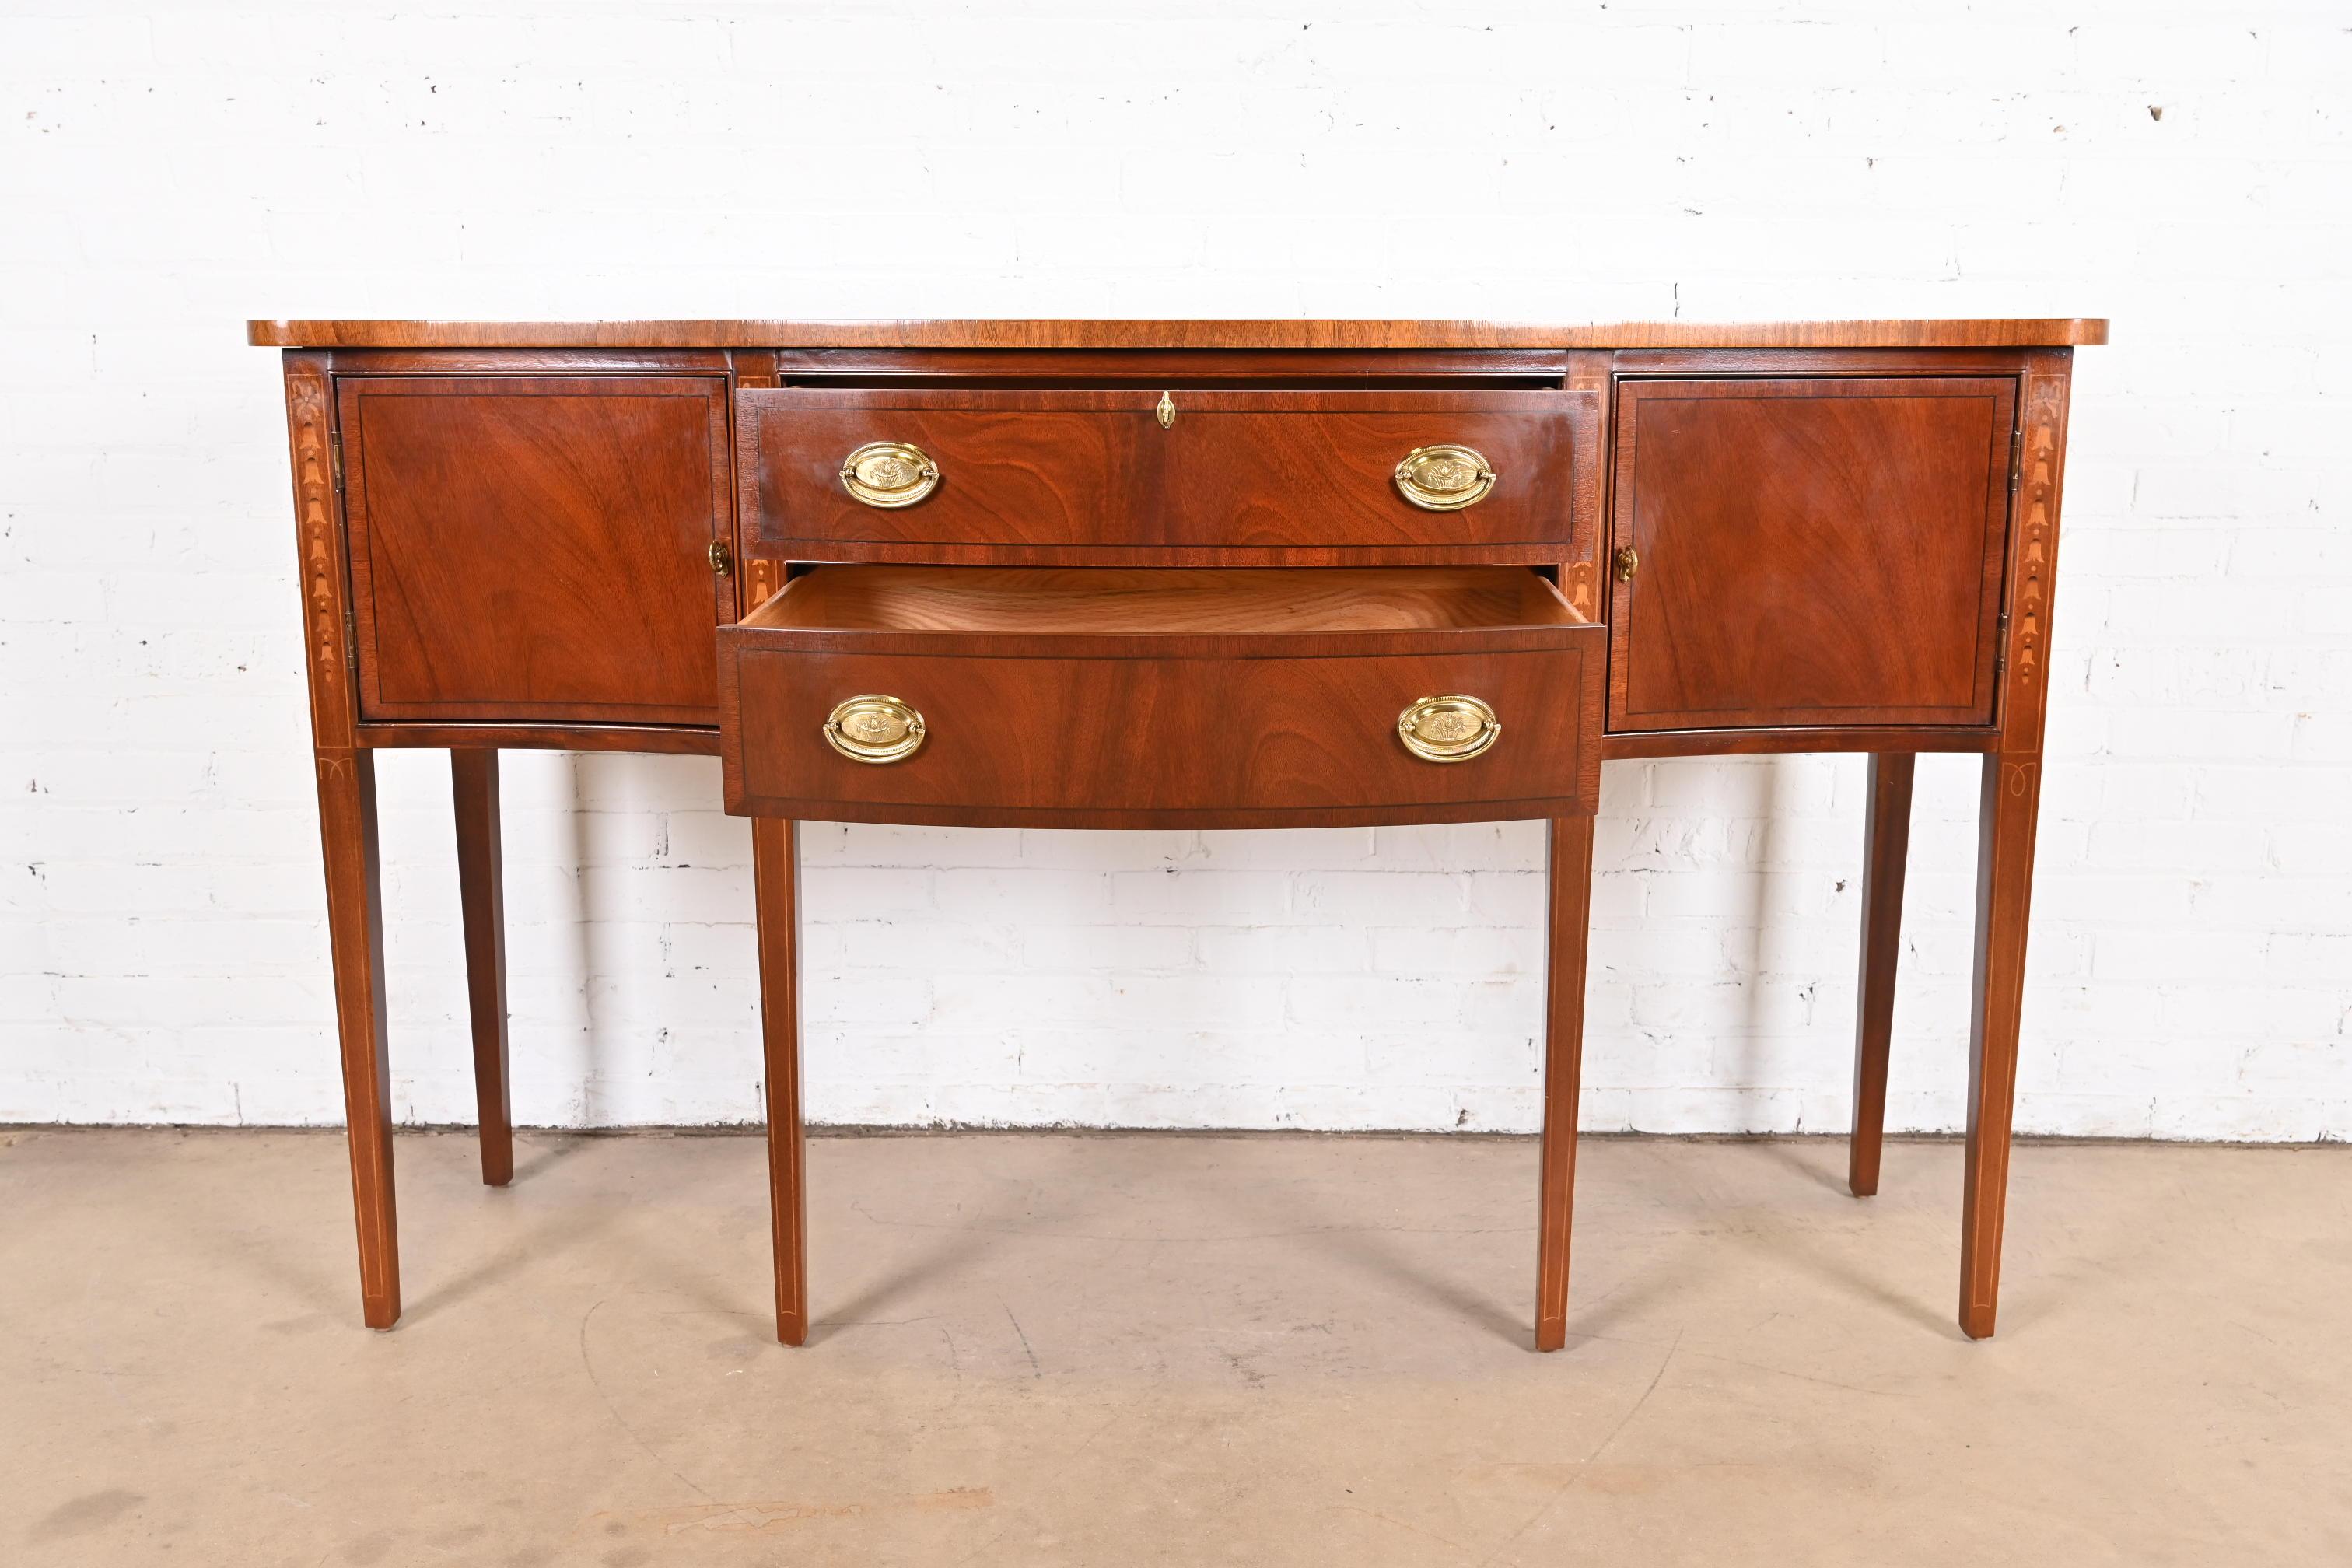 Hepplewhite Inlaid Mahogany Serpentine Front Sideboard Credenza For Sale 4